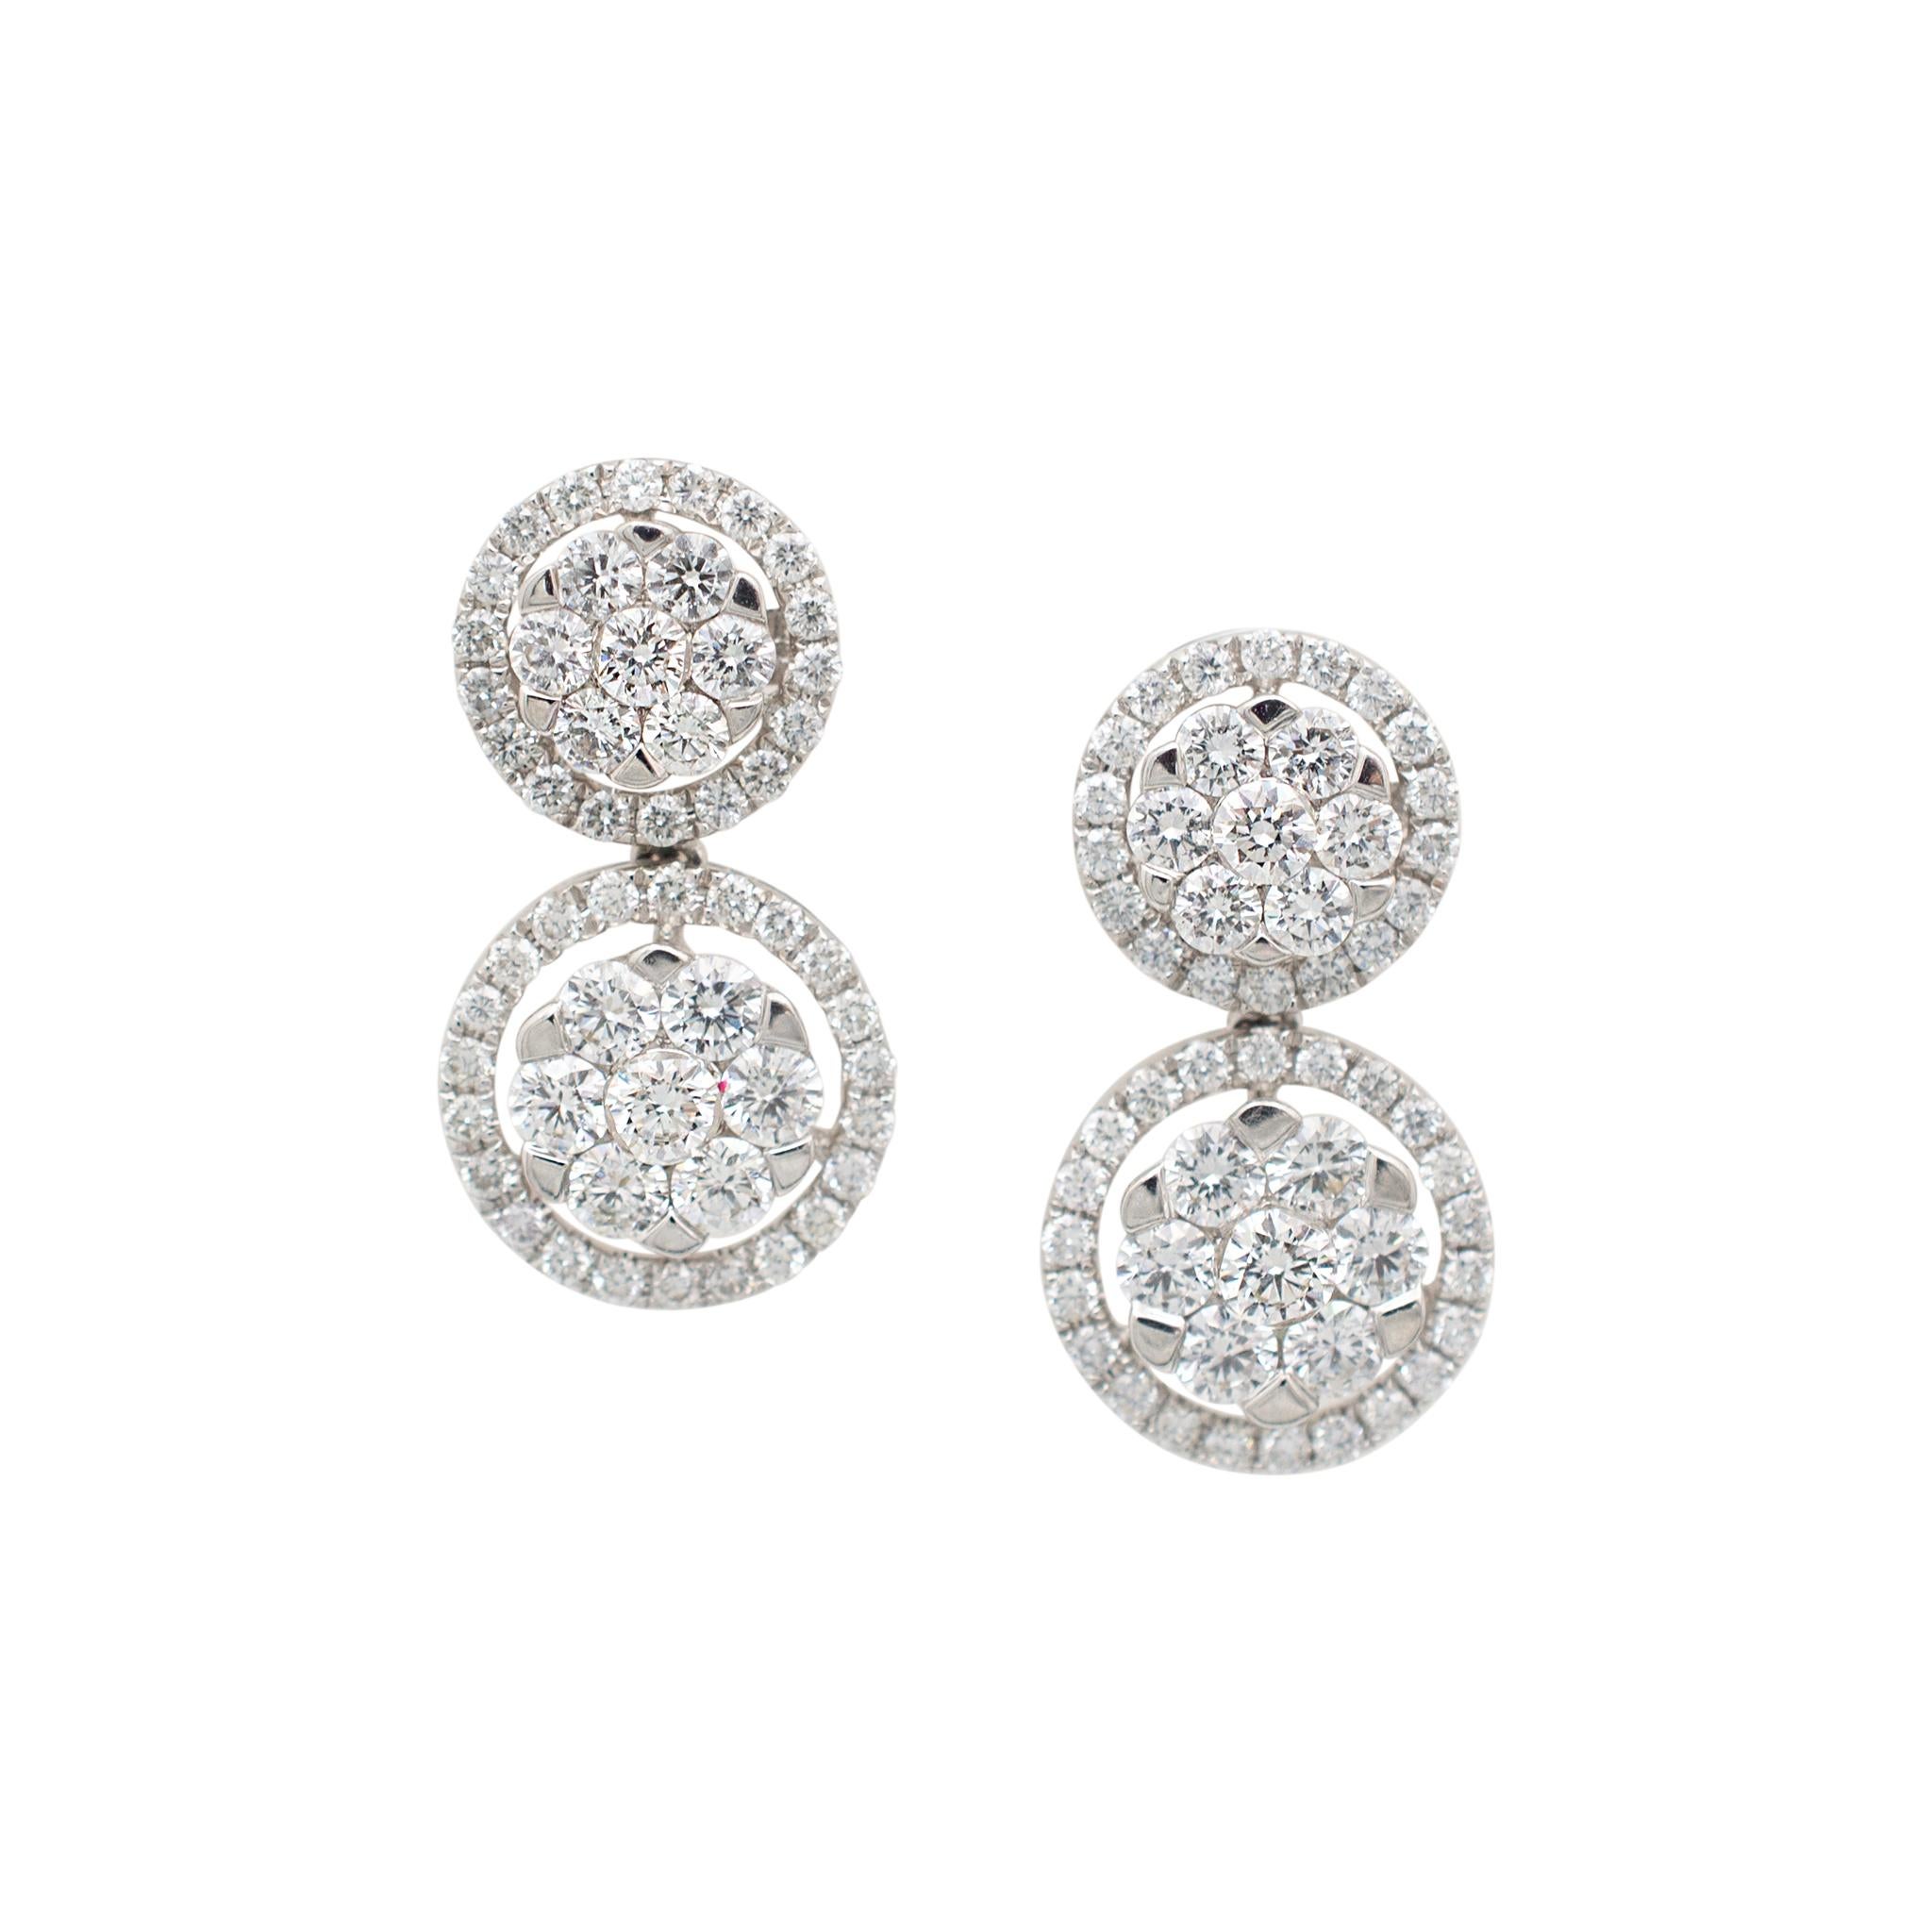 Gender: Ladies

Metal Type: 18K White Gold

Lenght: 0.75 inches

Weight:  5.67 grams

One pair of ladies 18K white gold, diamond halo, drop, cluster, stud, dangle earrings with push backs. The metal was tested and determined to be 18K white gold.